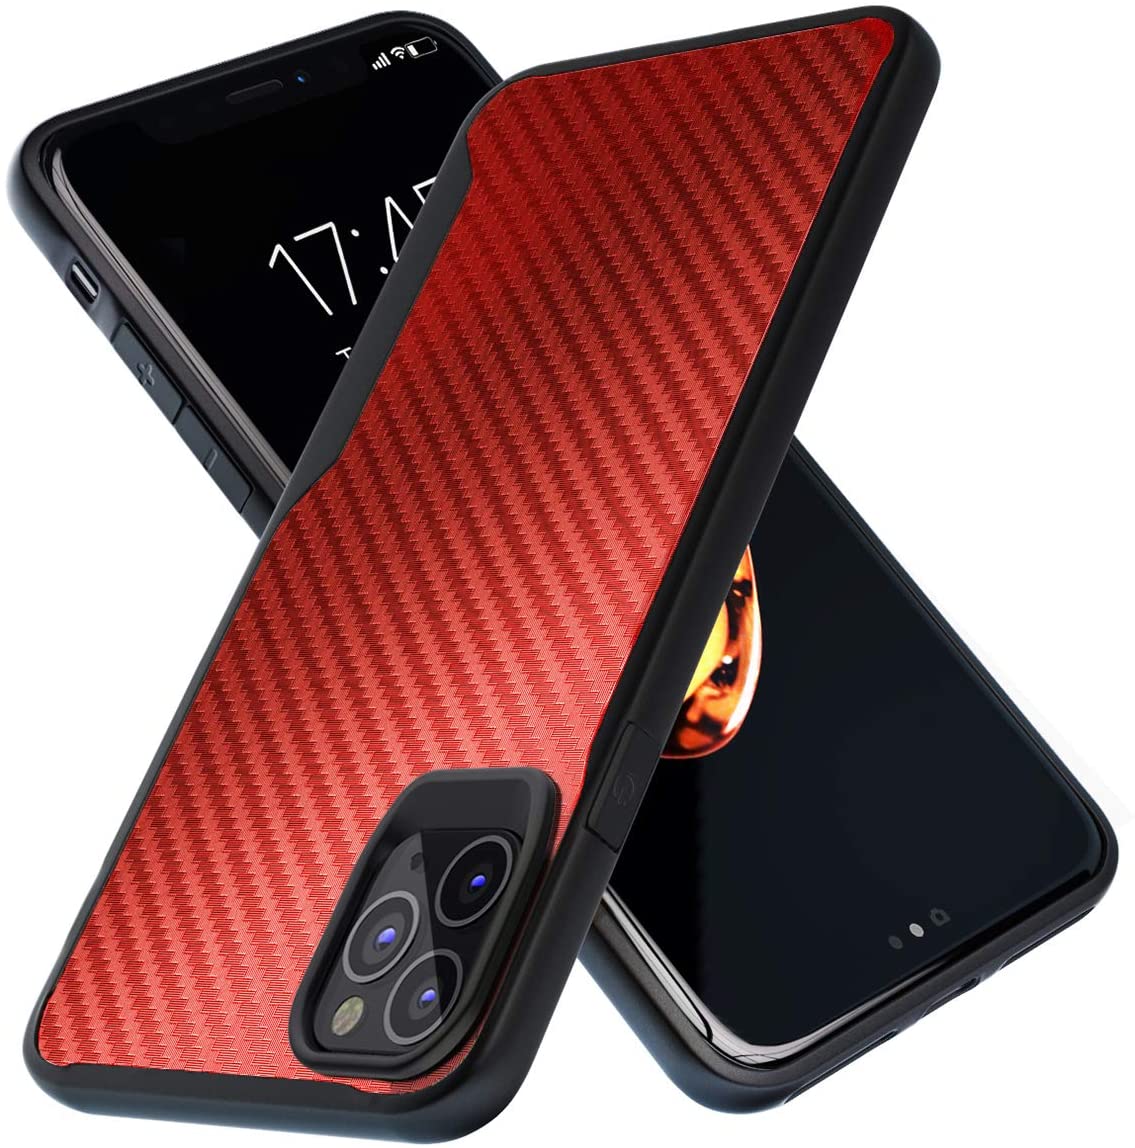 iPhone 11 Pro Max Kitoo Carbon Fiber Pattern Case Red